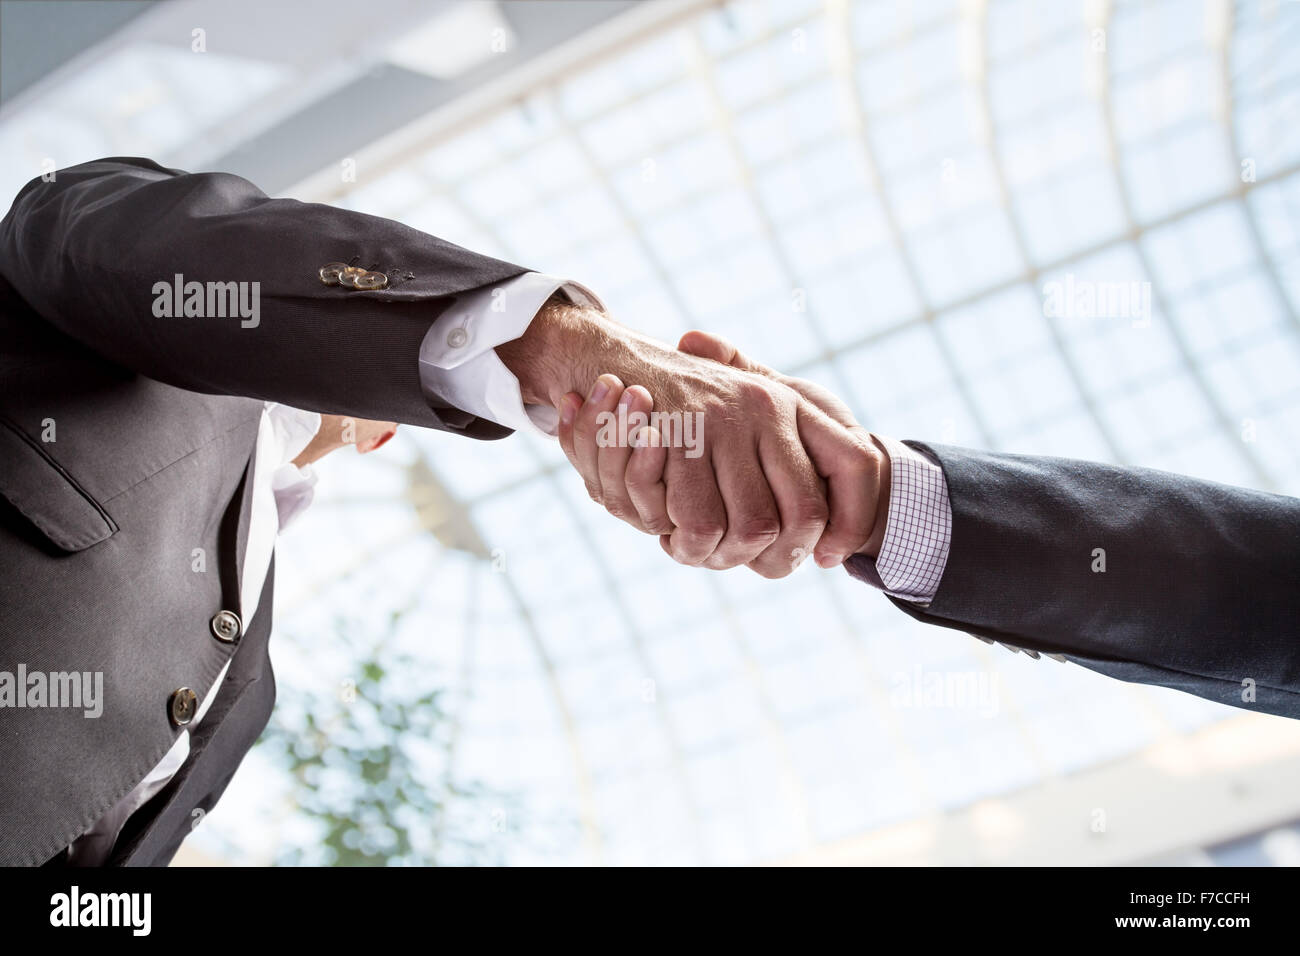 Handshake. Closeup shot of hands. The business center on the background. Stock Photo